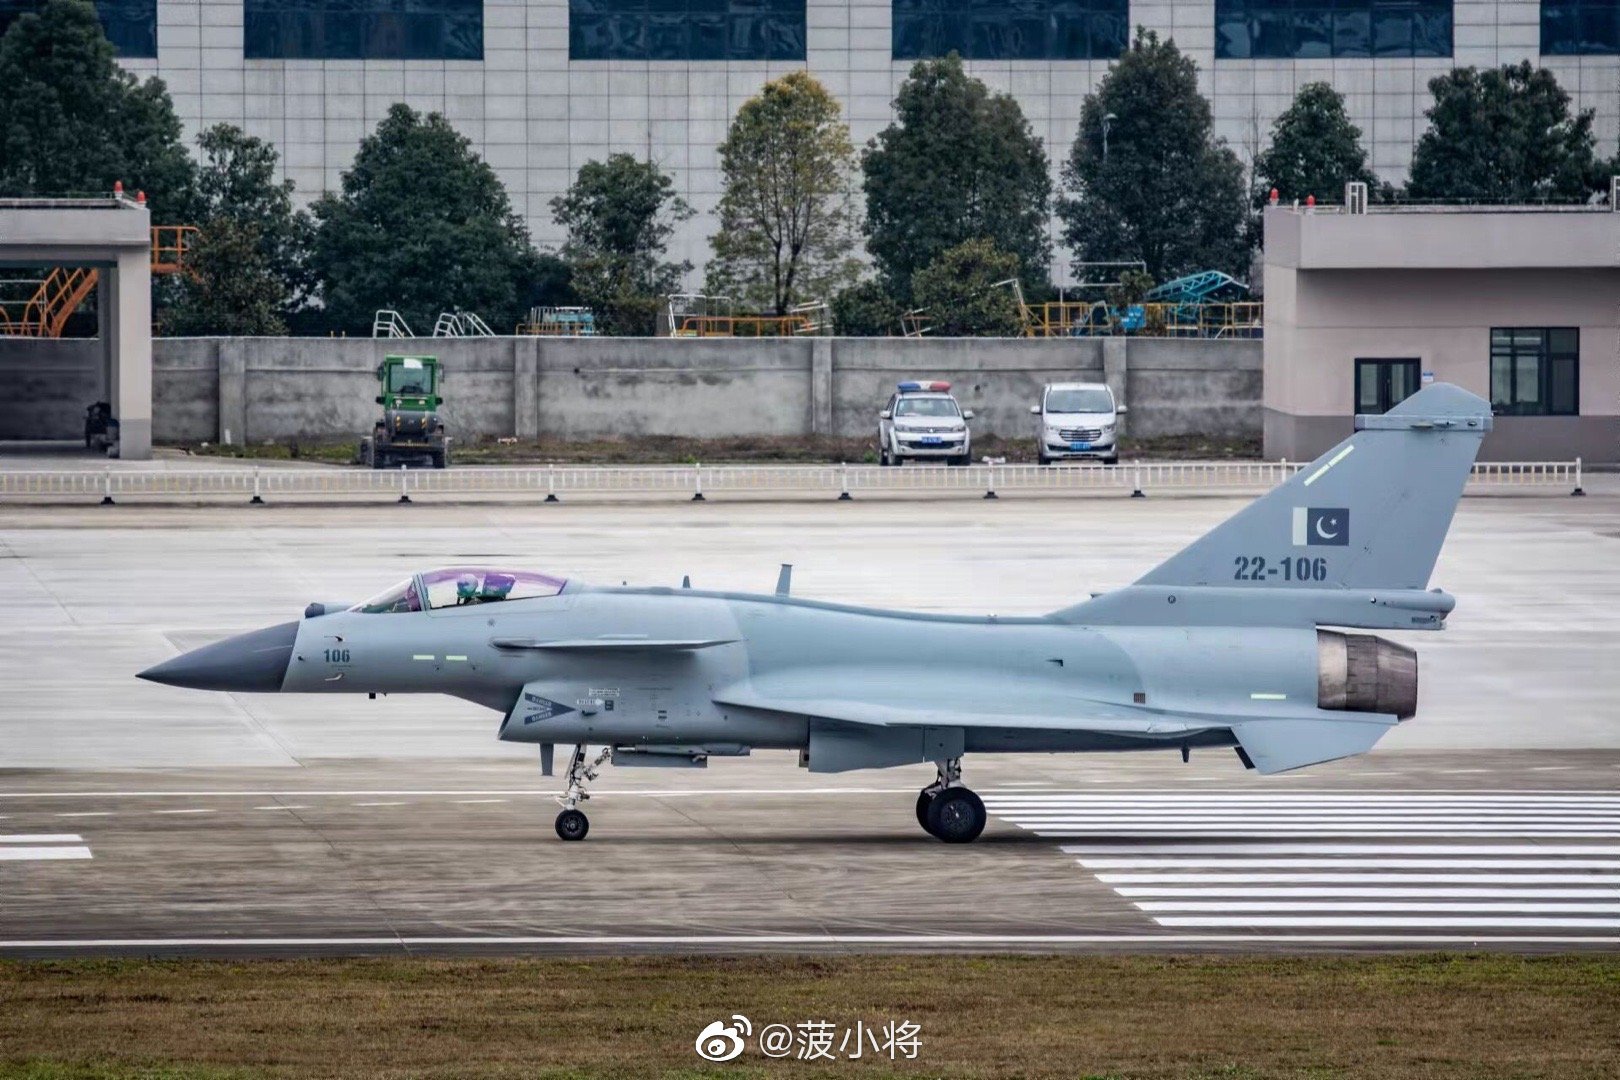 Rupprecht_A on Twitter: So far the best images of a Pakistani Dragon: 🐉 J-10CP - even as it seems, they are still designated J-10C only ;-) - serial number 22-106! (Image via